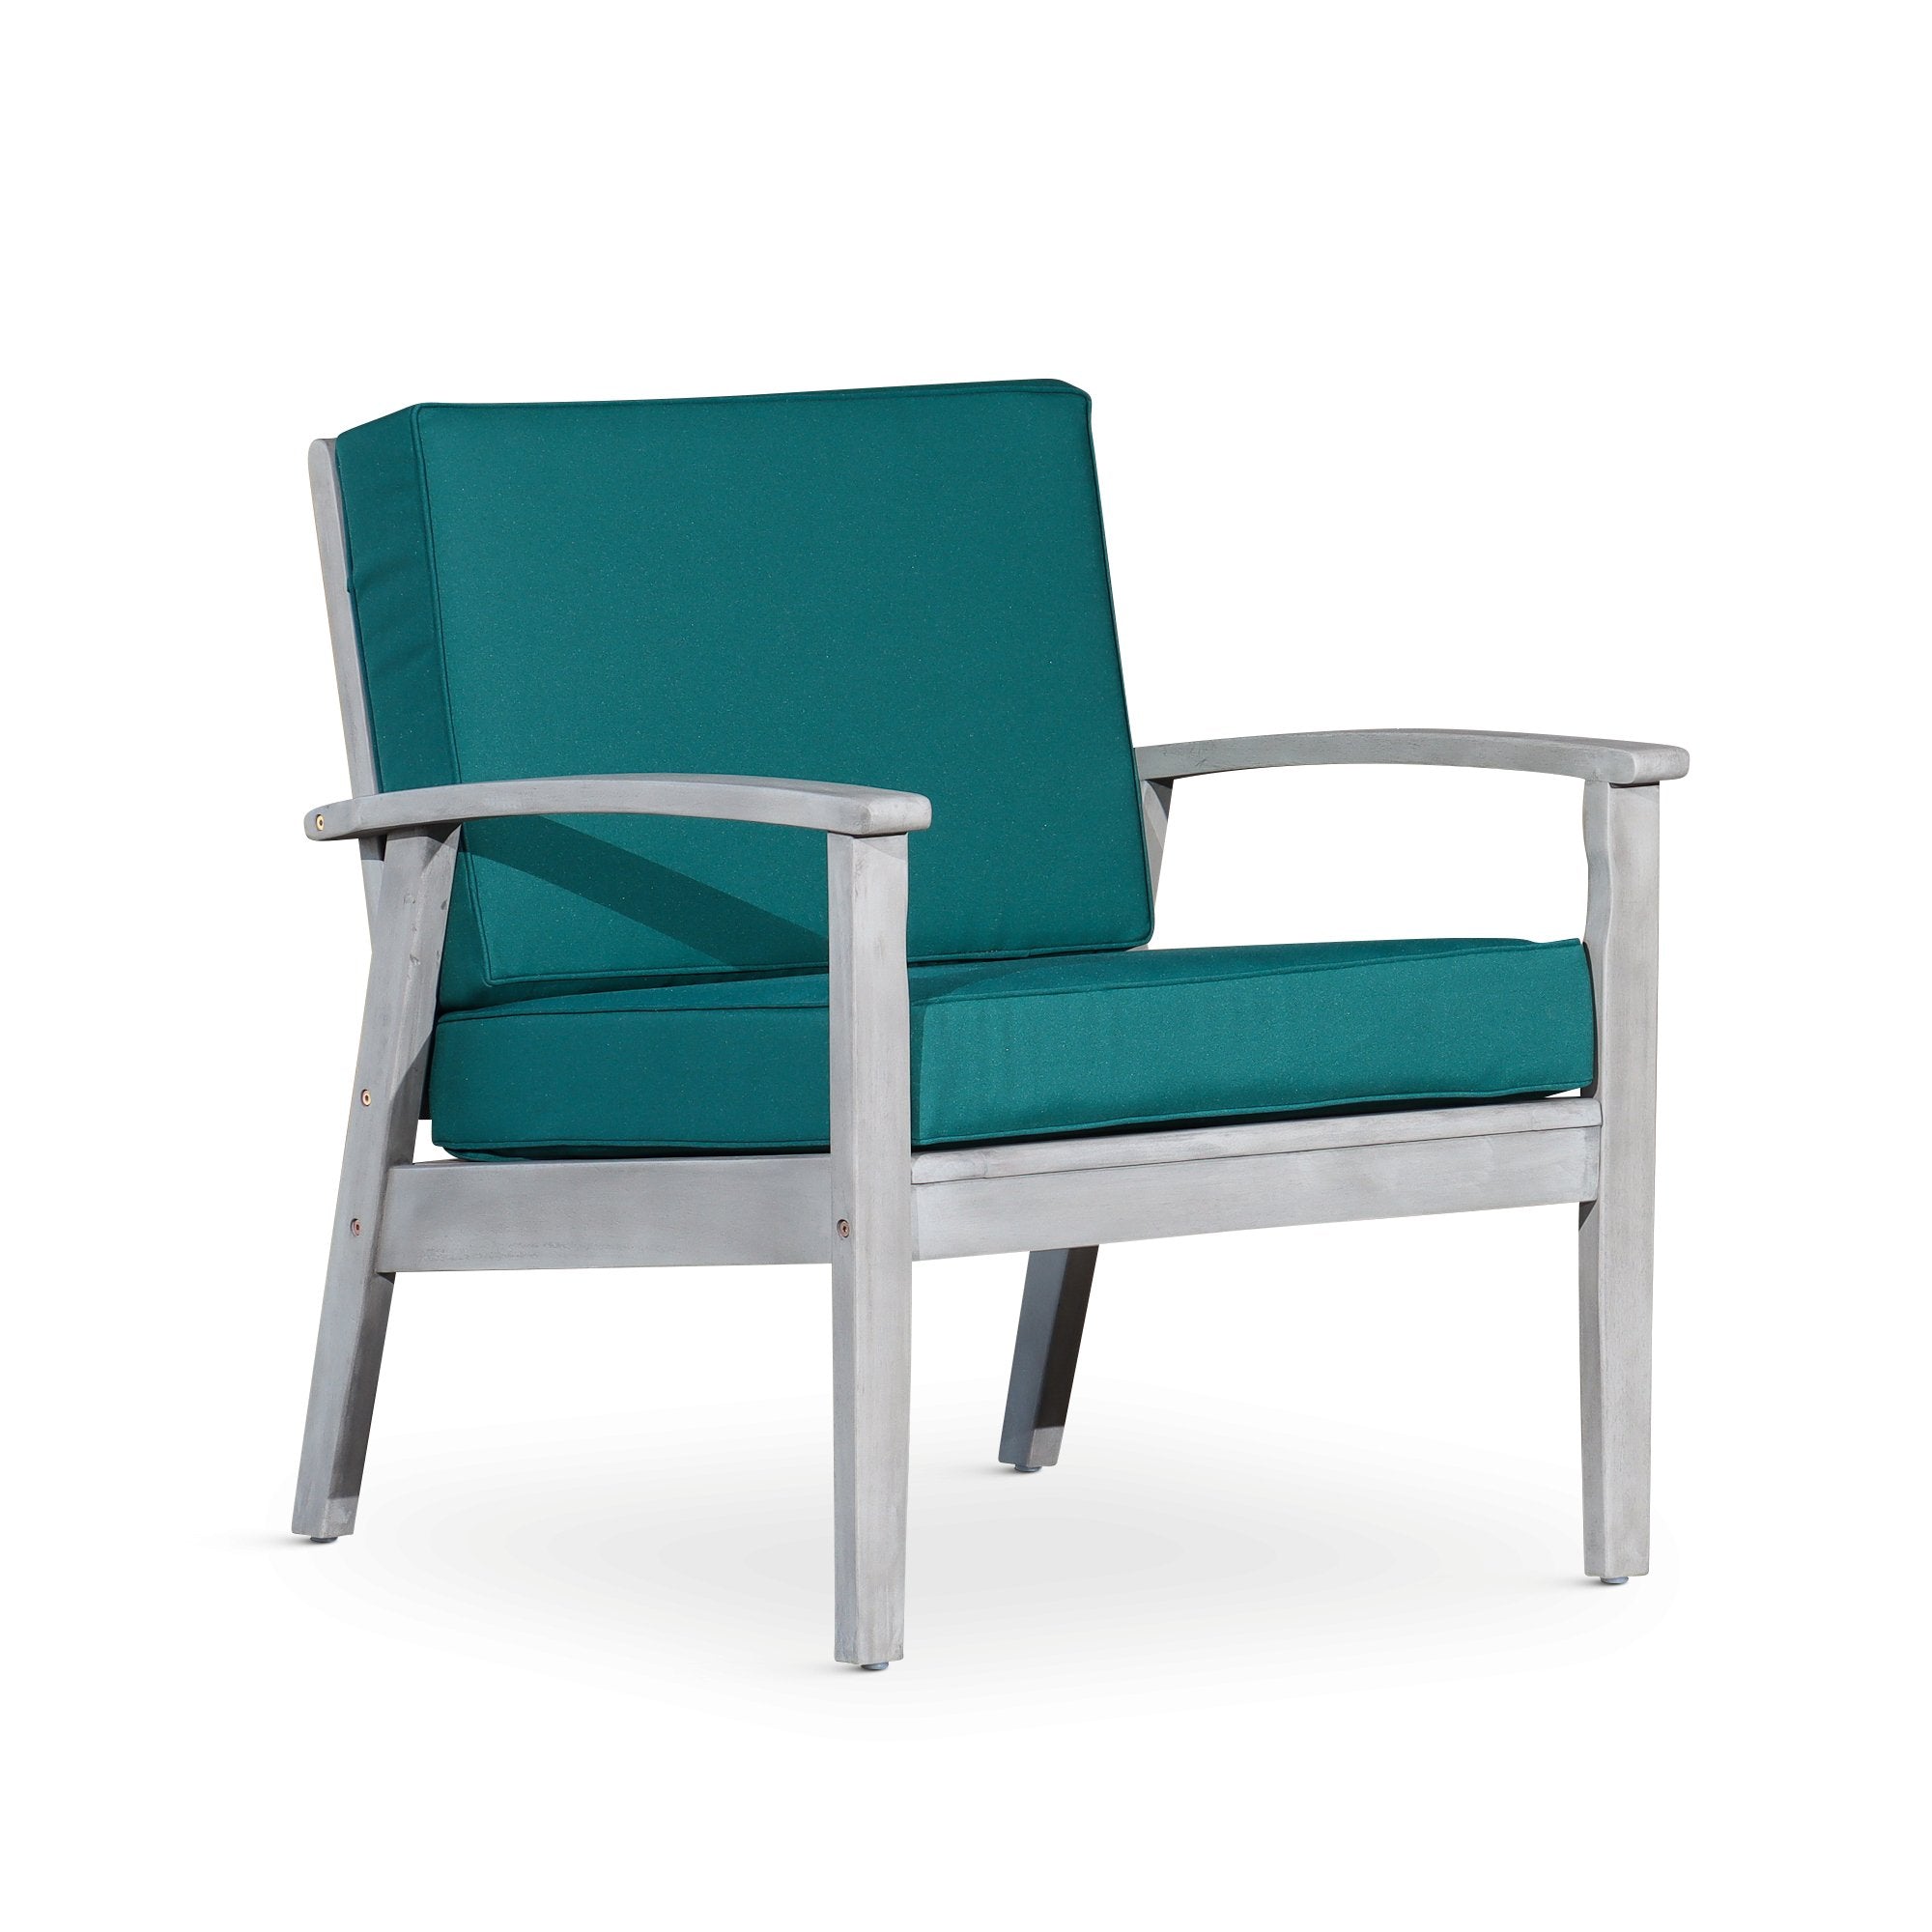 Deep-Seat-Outdoor-Chair,-Silver-Gray-Finish,-Dark-Green-Cushion-Outdoor-Chairs